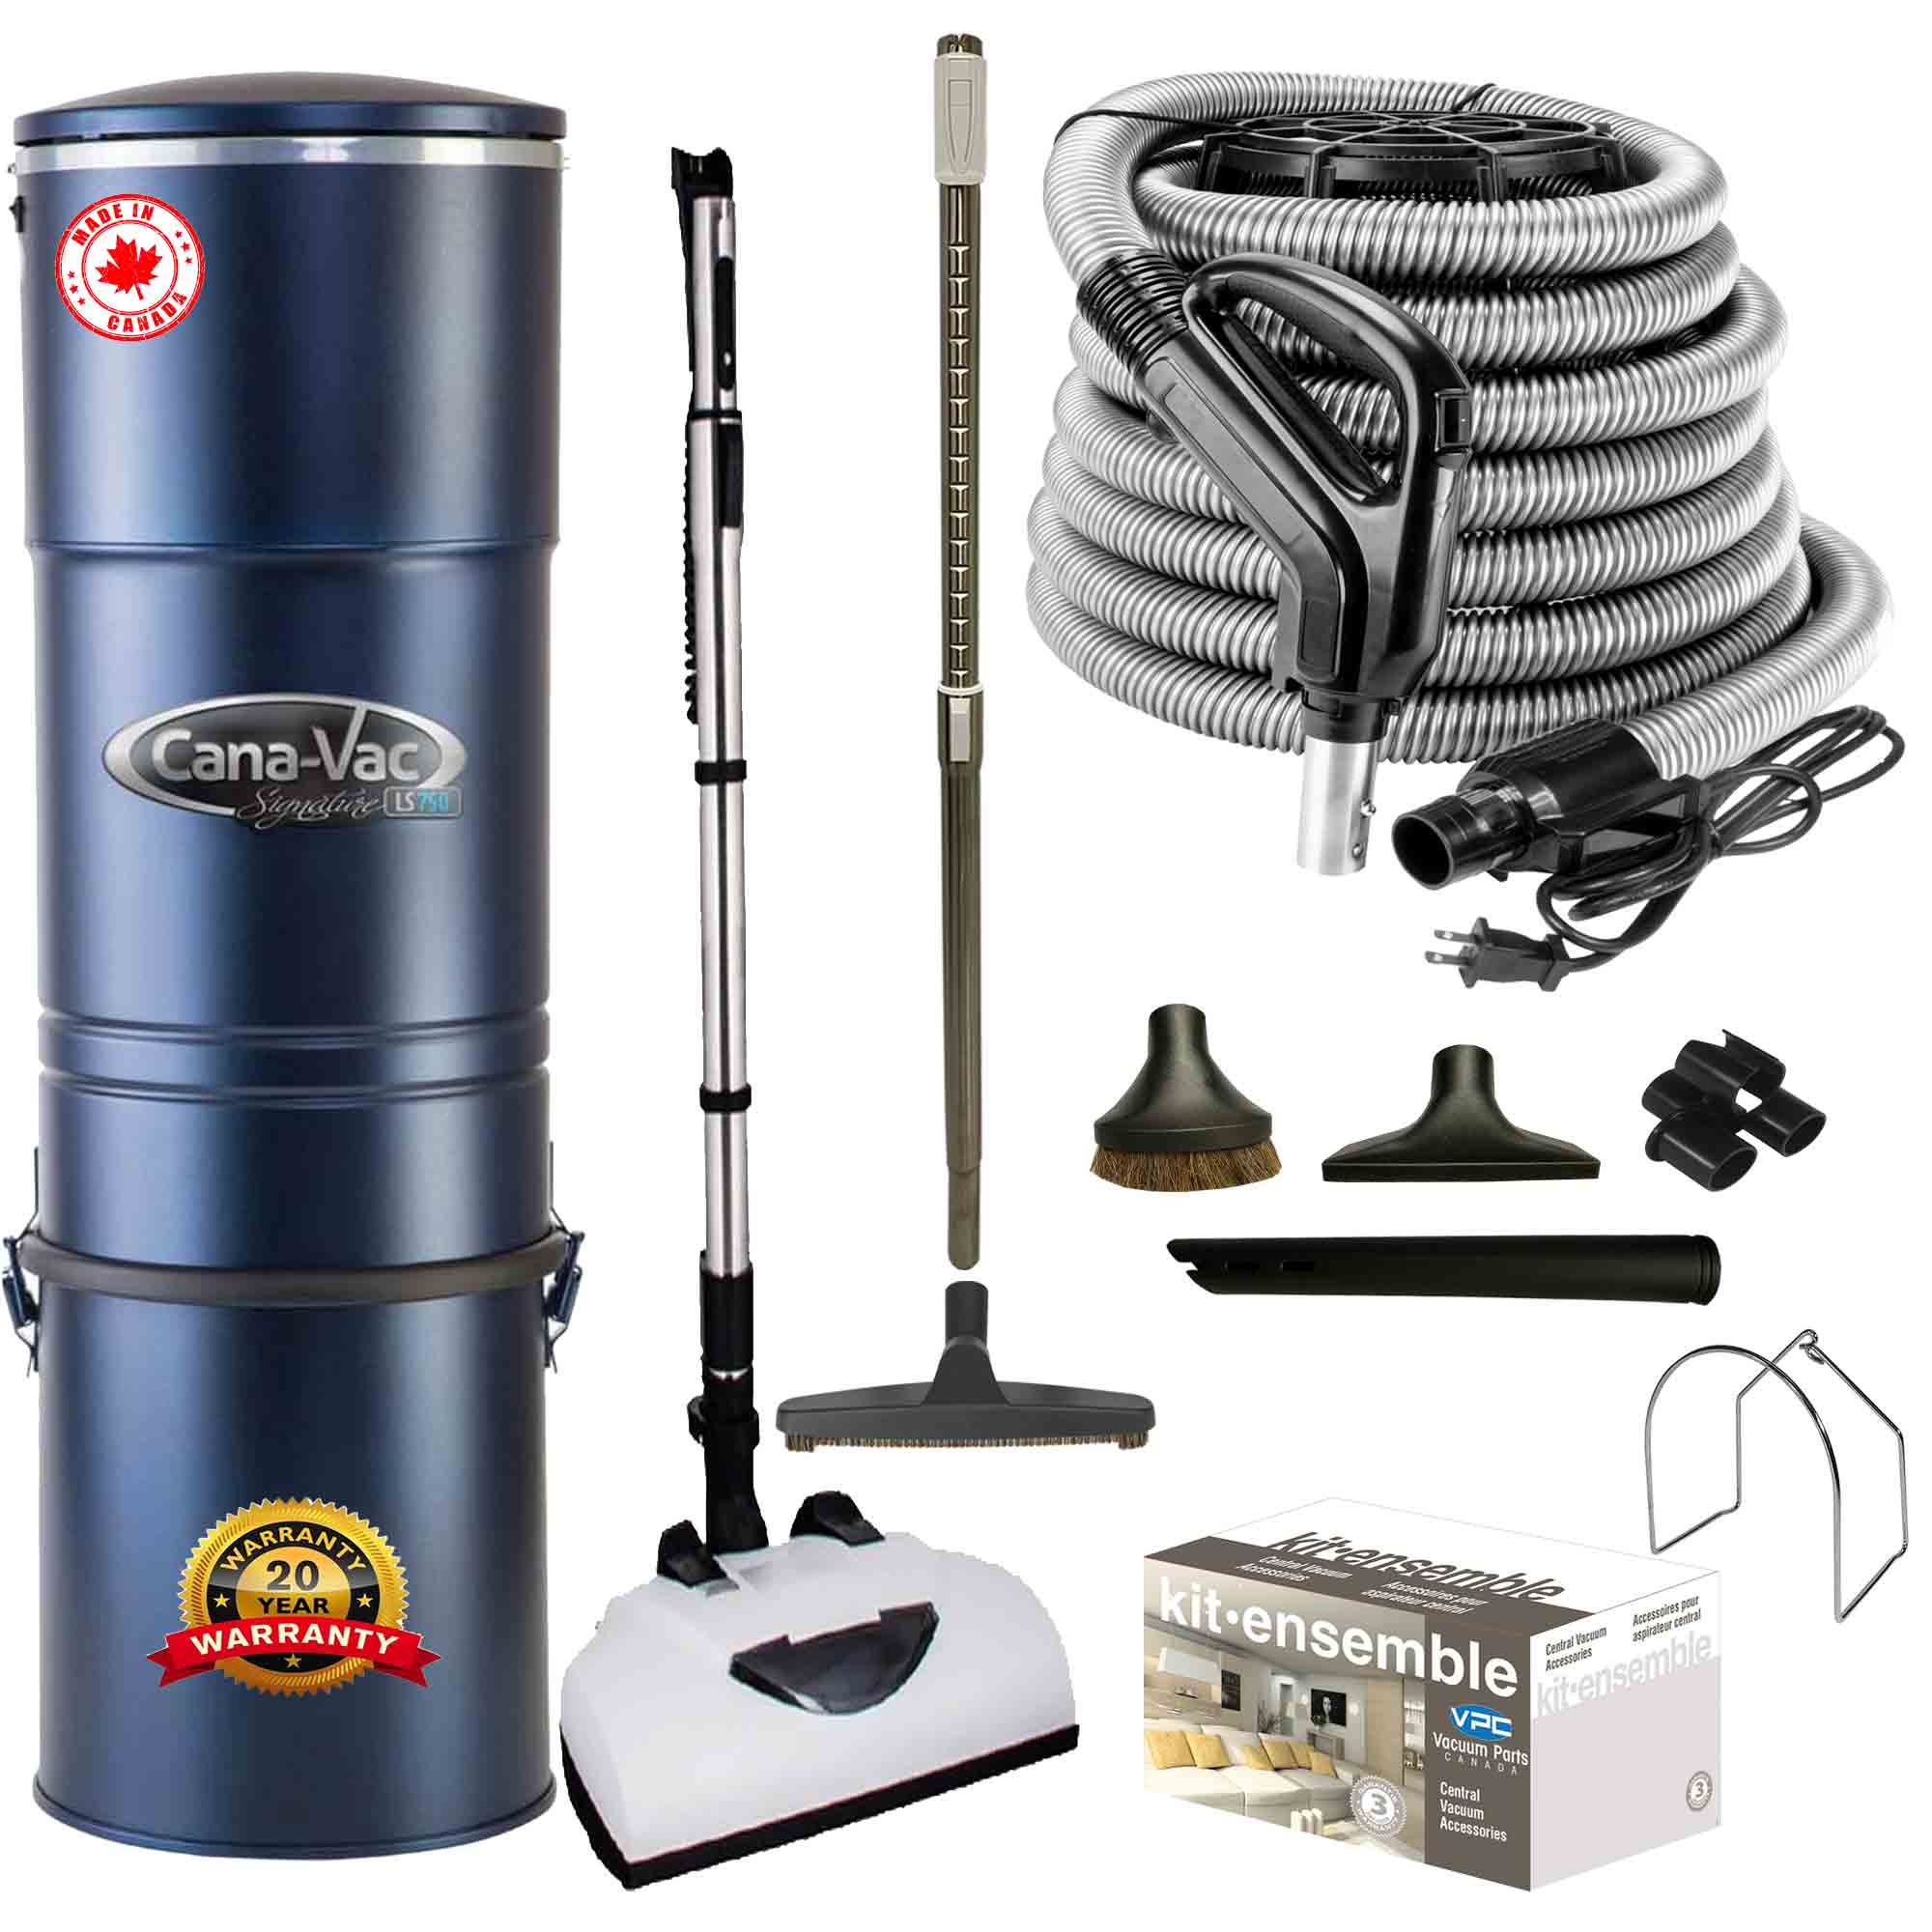 Cana-Vac LS790 Central Vacuum with Deluxe Electric Package (Black)